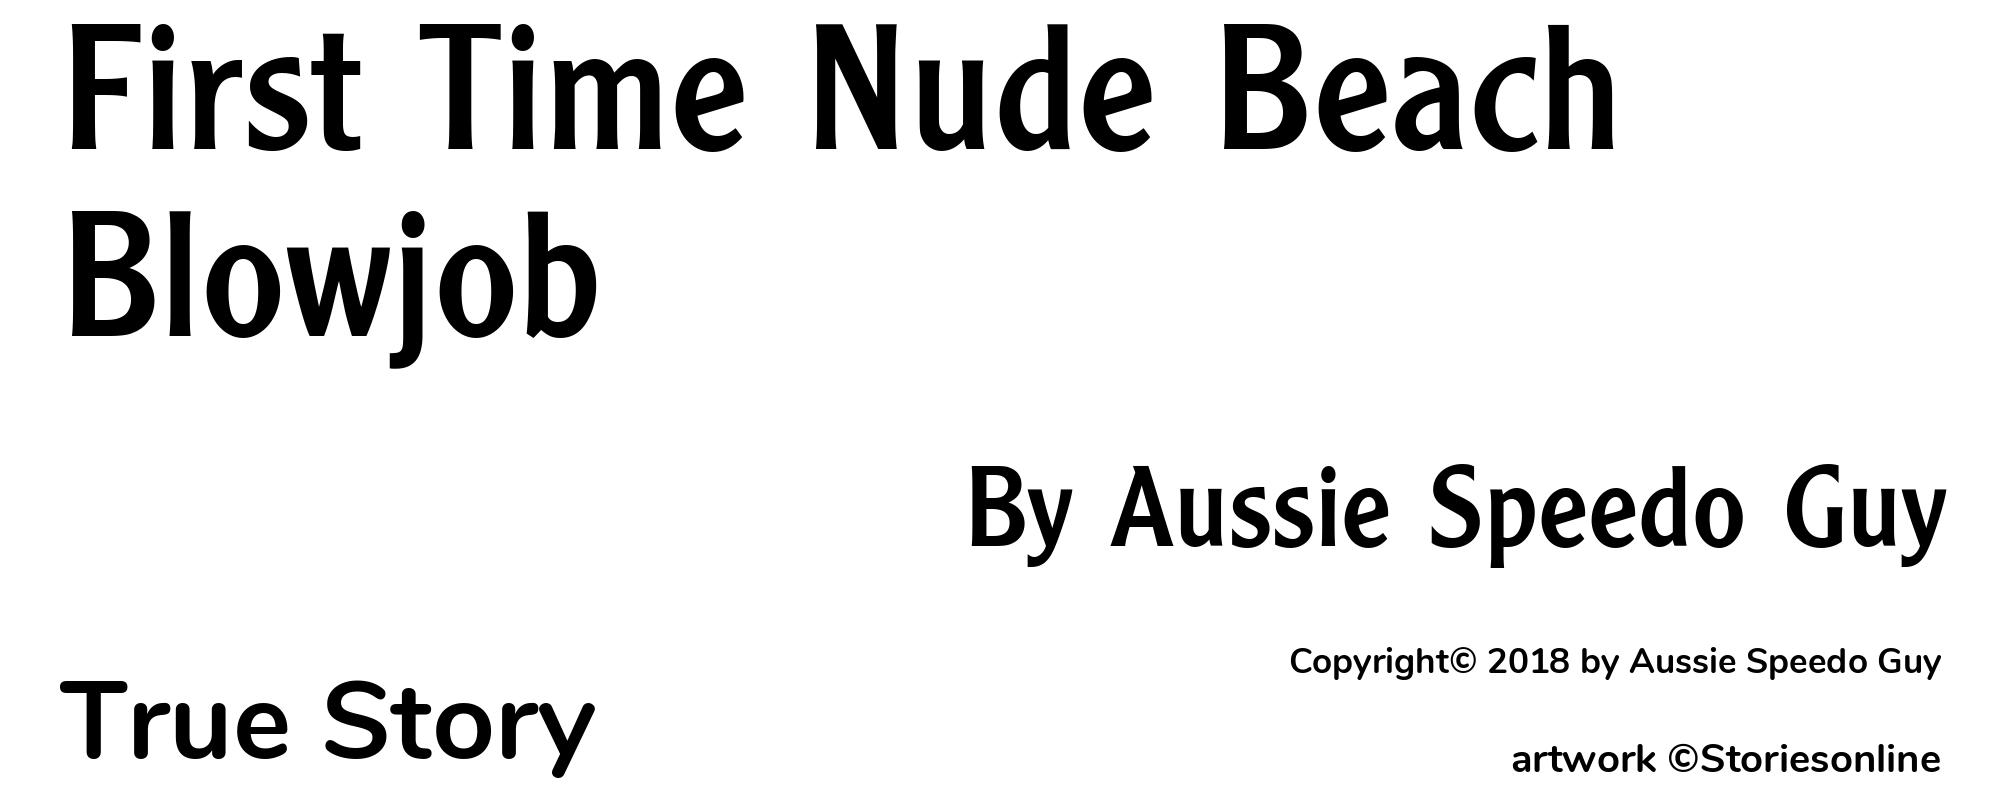 First Time Nude Beach Blowjob - Cover